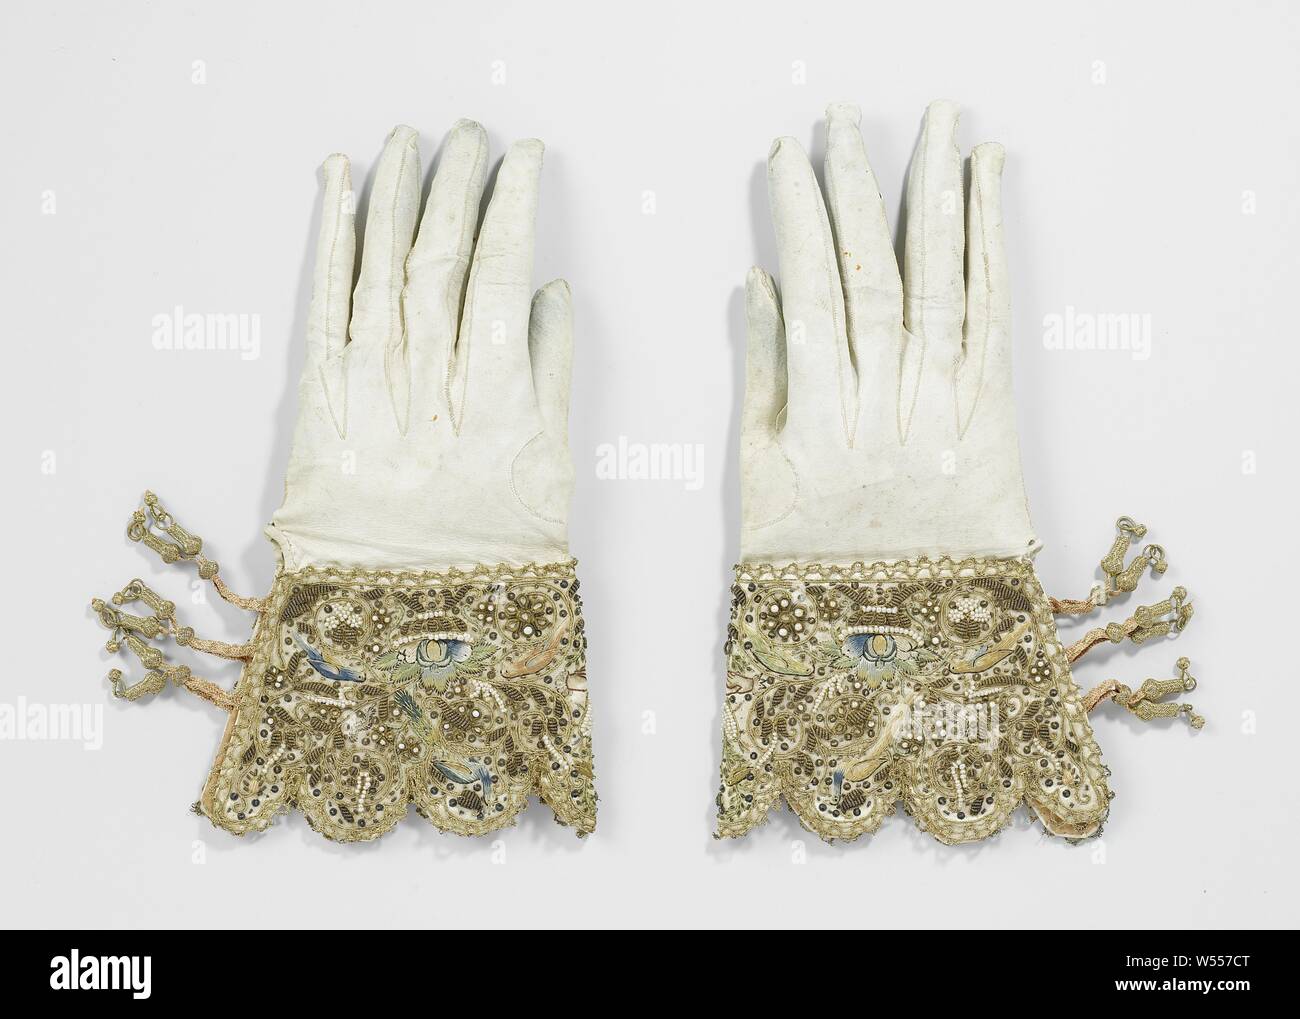 A Pair of Wedding Gloves, Left bridal glove of white wax leather, richly embroidered caps. Hooded edges. Closed with three pairs of pink lace bands, on which a gold button is slid. Symmetrical pattern of, among other things, two hands placed together in brown contour under a heart pierced with arrows and two devoted birds. Rich pattern in different colors, embroidery, pearls and sequins. Gold bobbin lace all around., anonymous, Netherlands, 1622, geheel, banden, versiering, embroidering, l 24 cm l 26 cm × w 13 cm Stock Photo